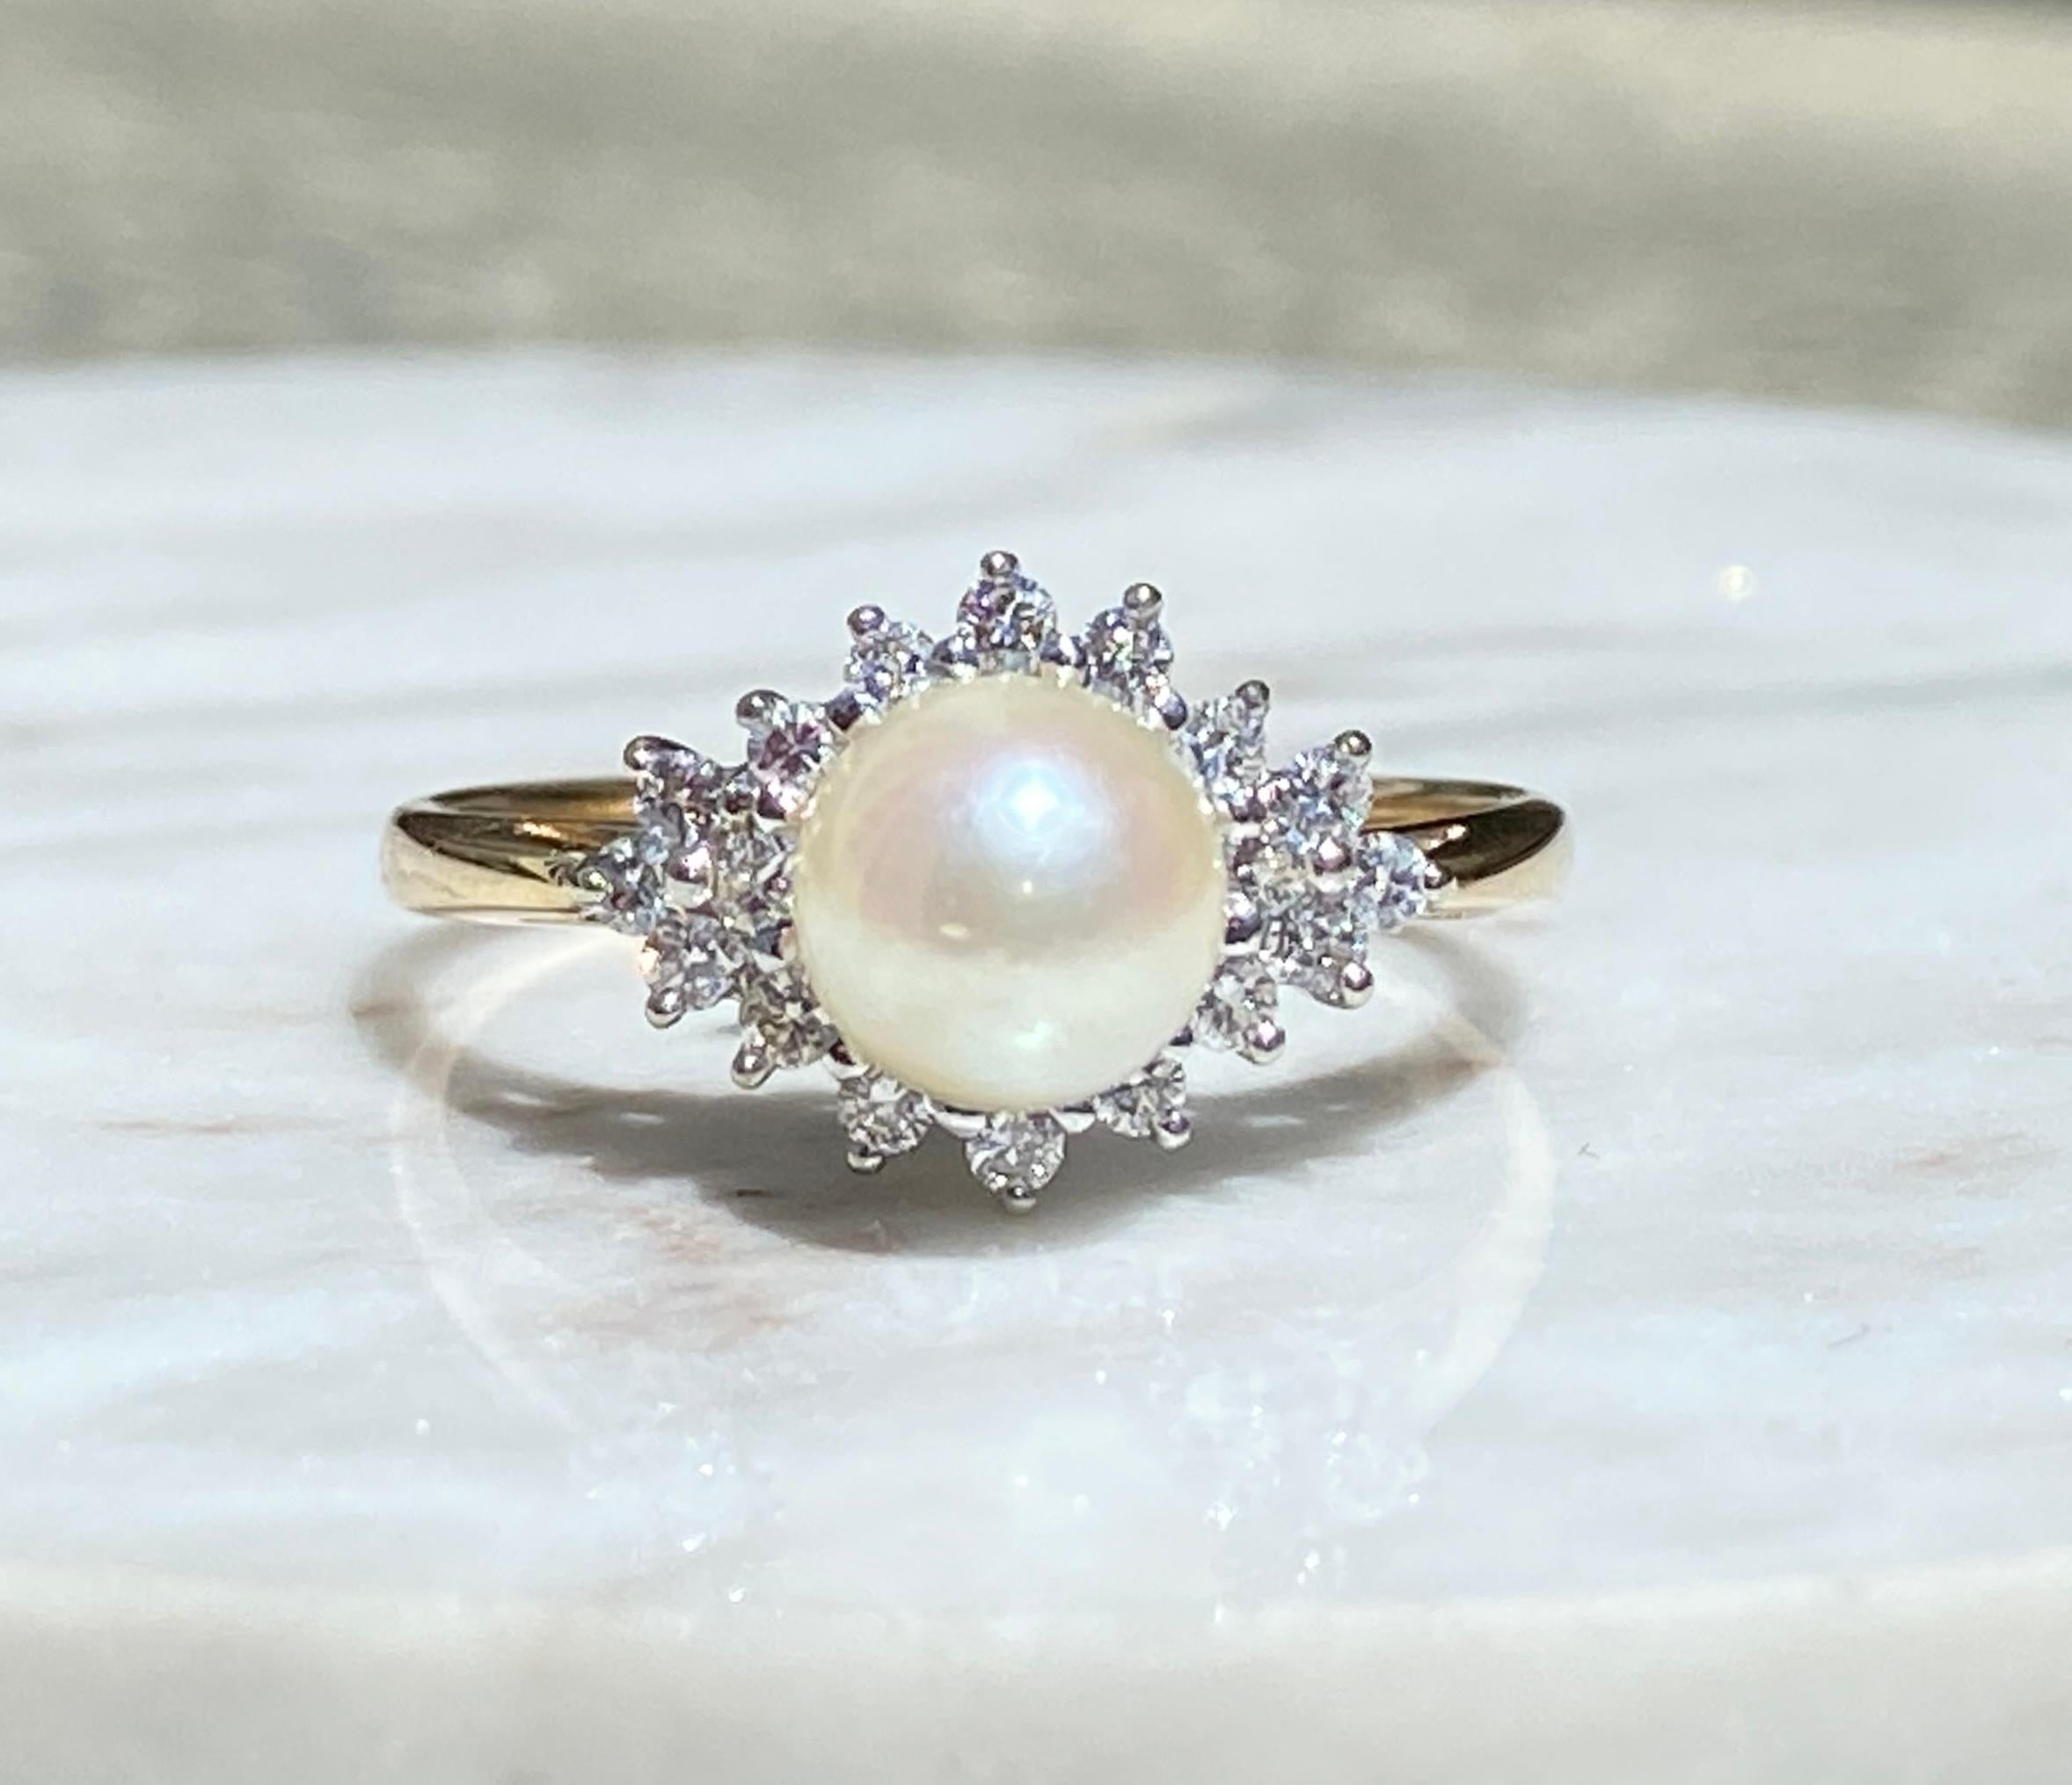 One lady's 14k yellow and white gold ring featuring a 6.4mm round cultured pearl and 0.18tcw of I/J color and SI clarity round brilliant diamonds, stamped 14k. The ring weighs 2.4 grams and is a US size 7. The ring is sizable, but this is not a